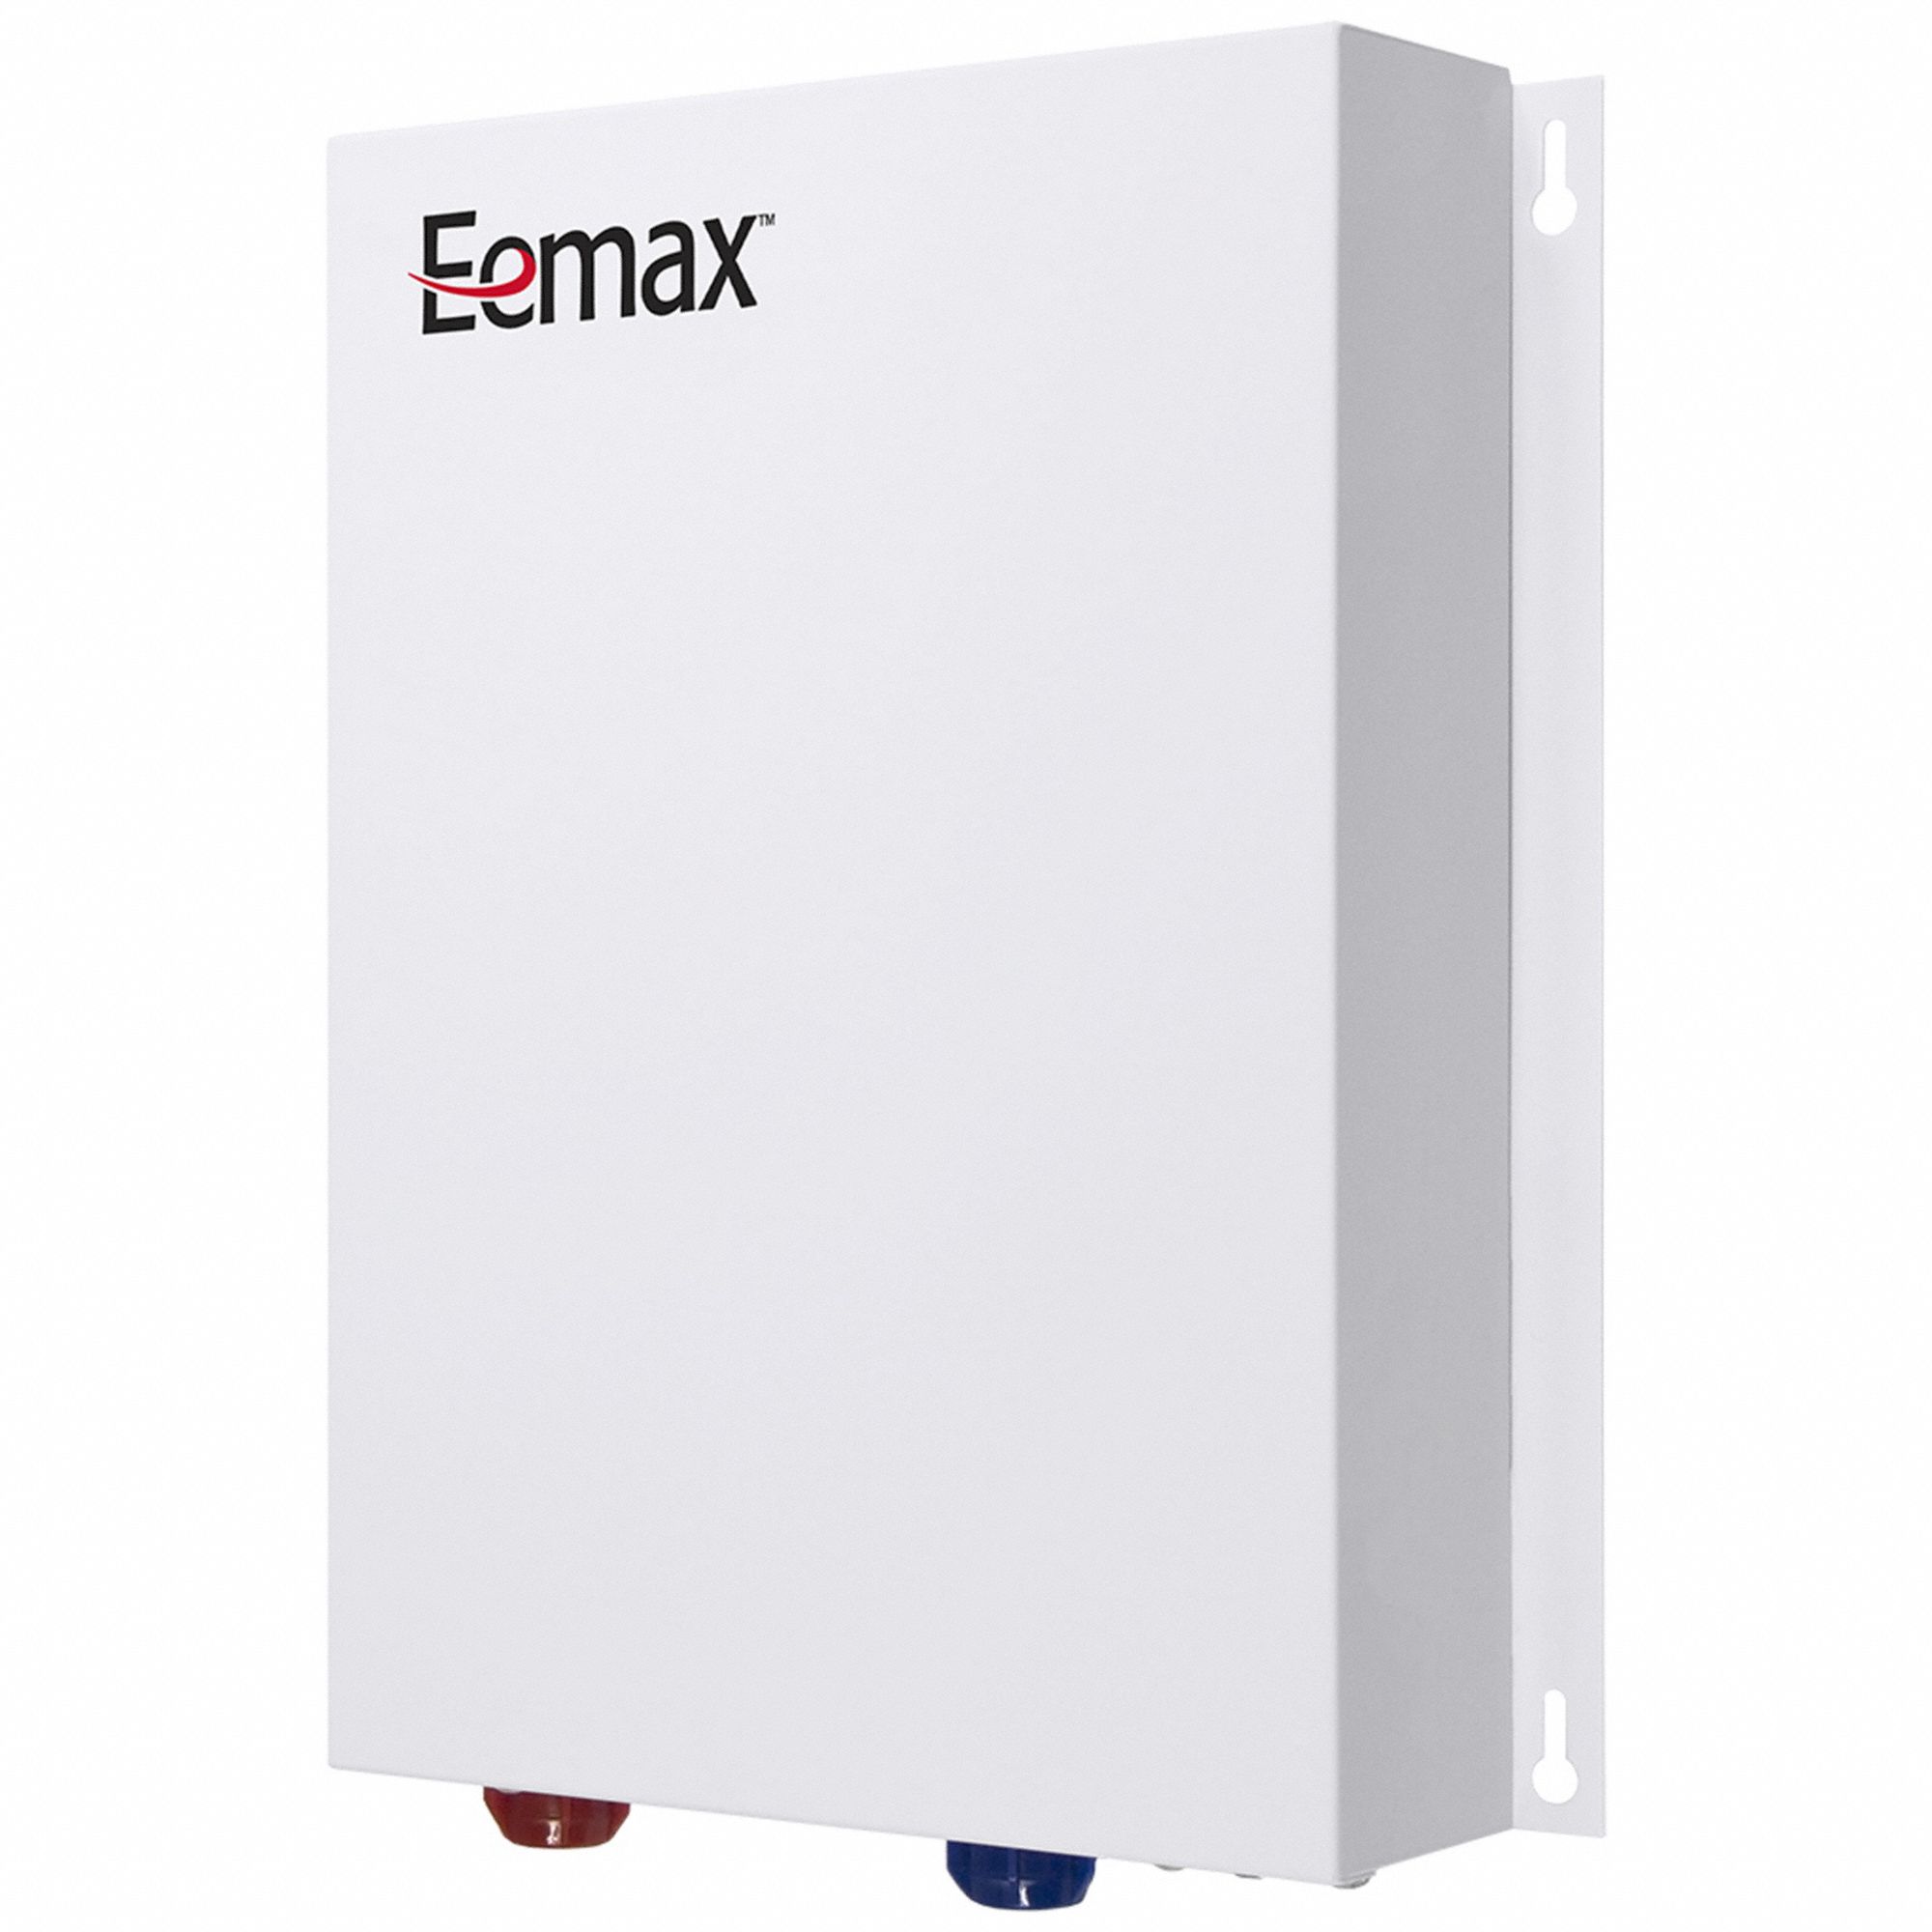 EEMAX PR018240 Electric Tankless Water Heater240V